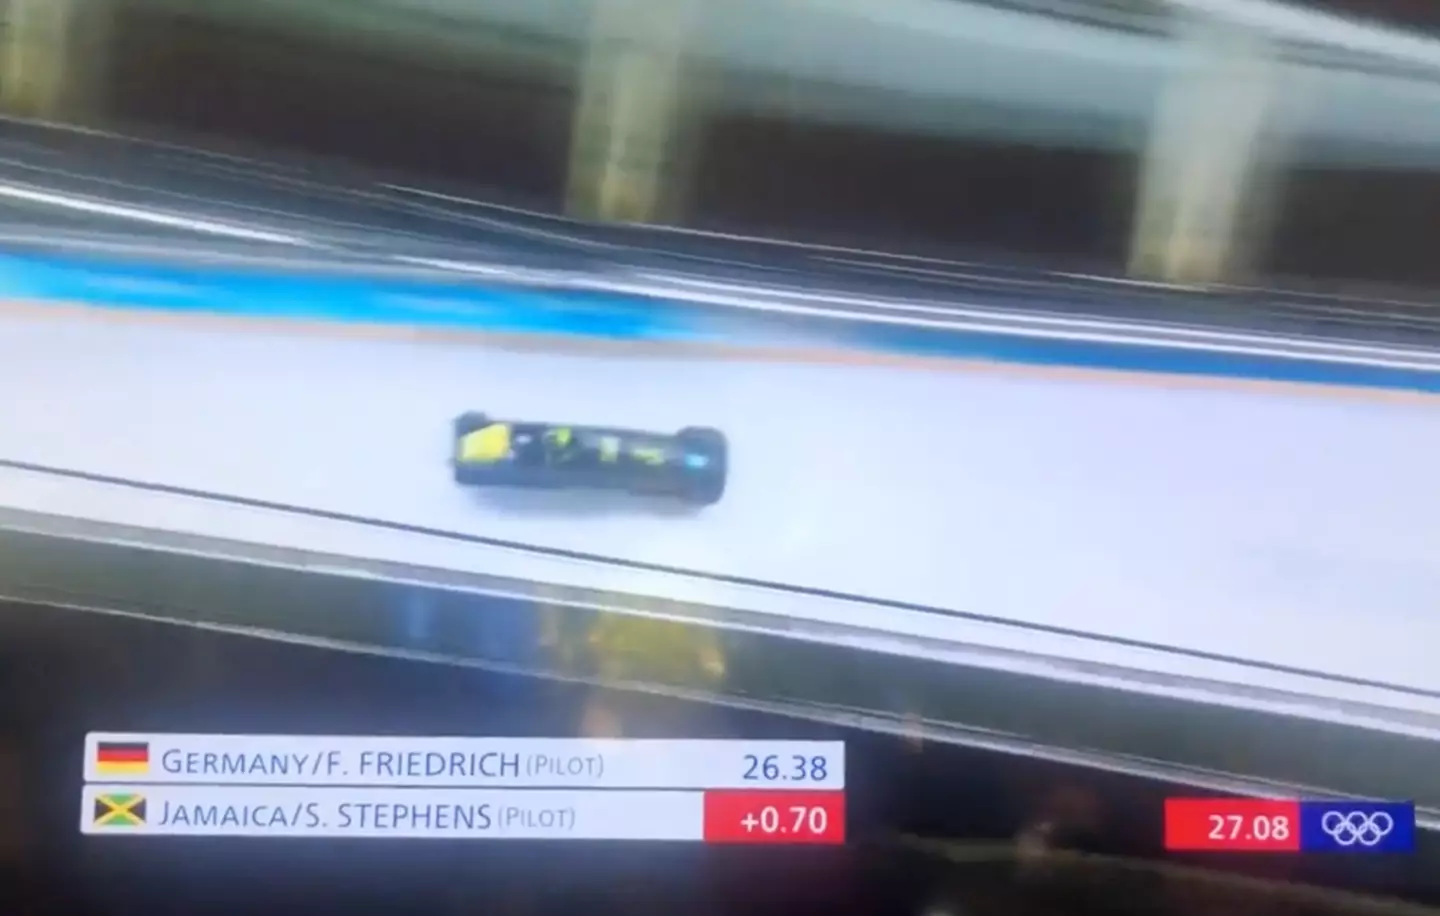 The Jamaican two-man bobsleigh team has been competing in the heats today.